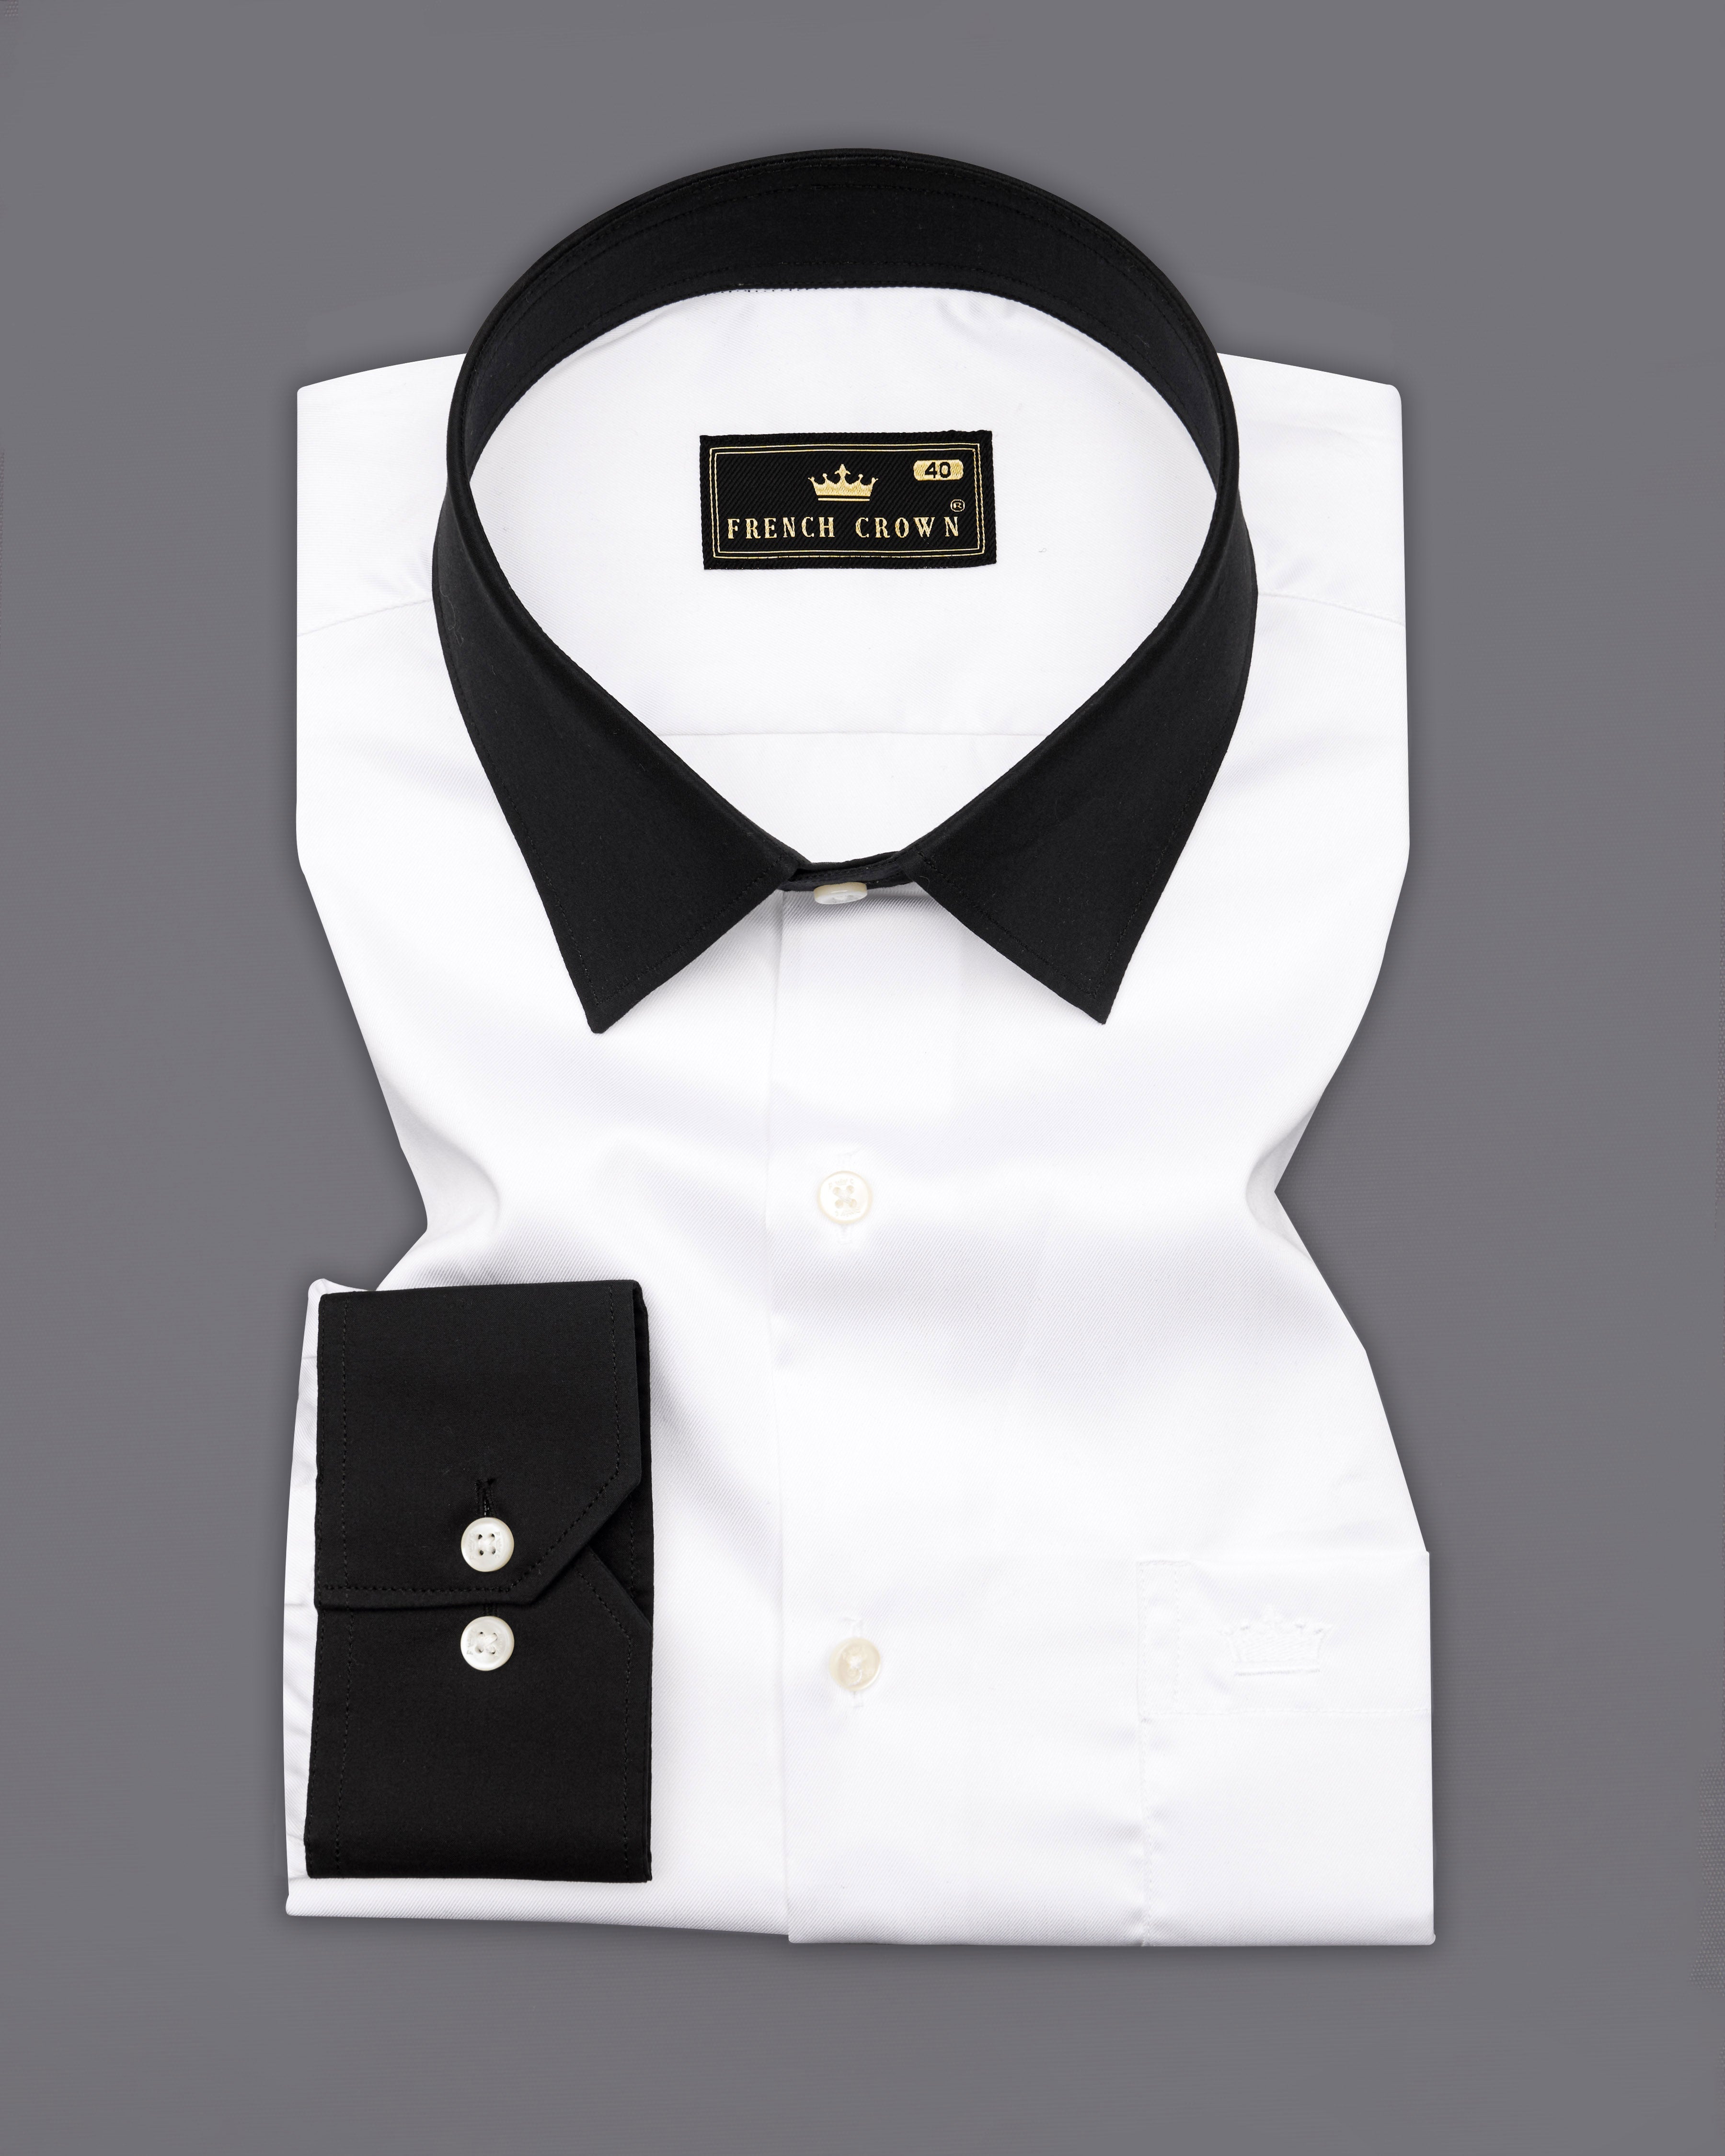 Bright White with Black Cuffs and Collar Twill Premium Cotton Shirt 9945-BCC-38, 9945-BCC-H-38, 9945-BCC-39, 9945-BCC-H-39, 9945-BCC-40, 9945-BCC-H-40, 9945-BCC-42, 9945-BCC-H-42, 9945-BCC-44, 9945-BCC-H-44, 9945-BCC-46, 9945-BCC-H-46, 9945-BCC-48, 9945-BCC-H-48, 9945-BCC-50, 9945-BCC-H-50, 9945-BCC-52, 9945-BCC-H-52 